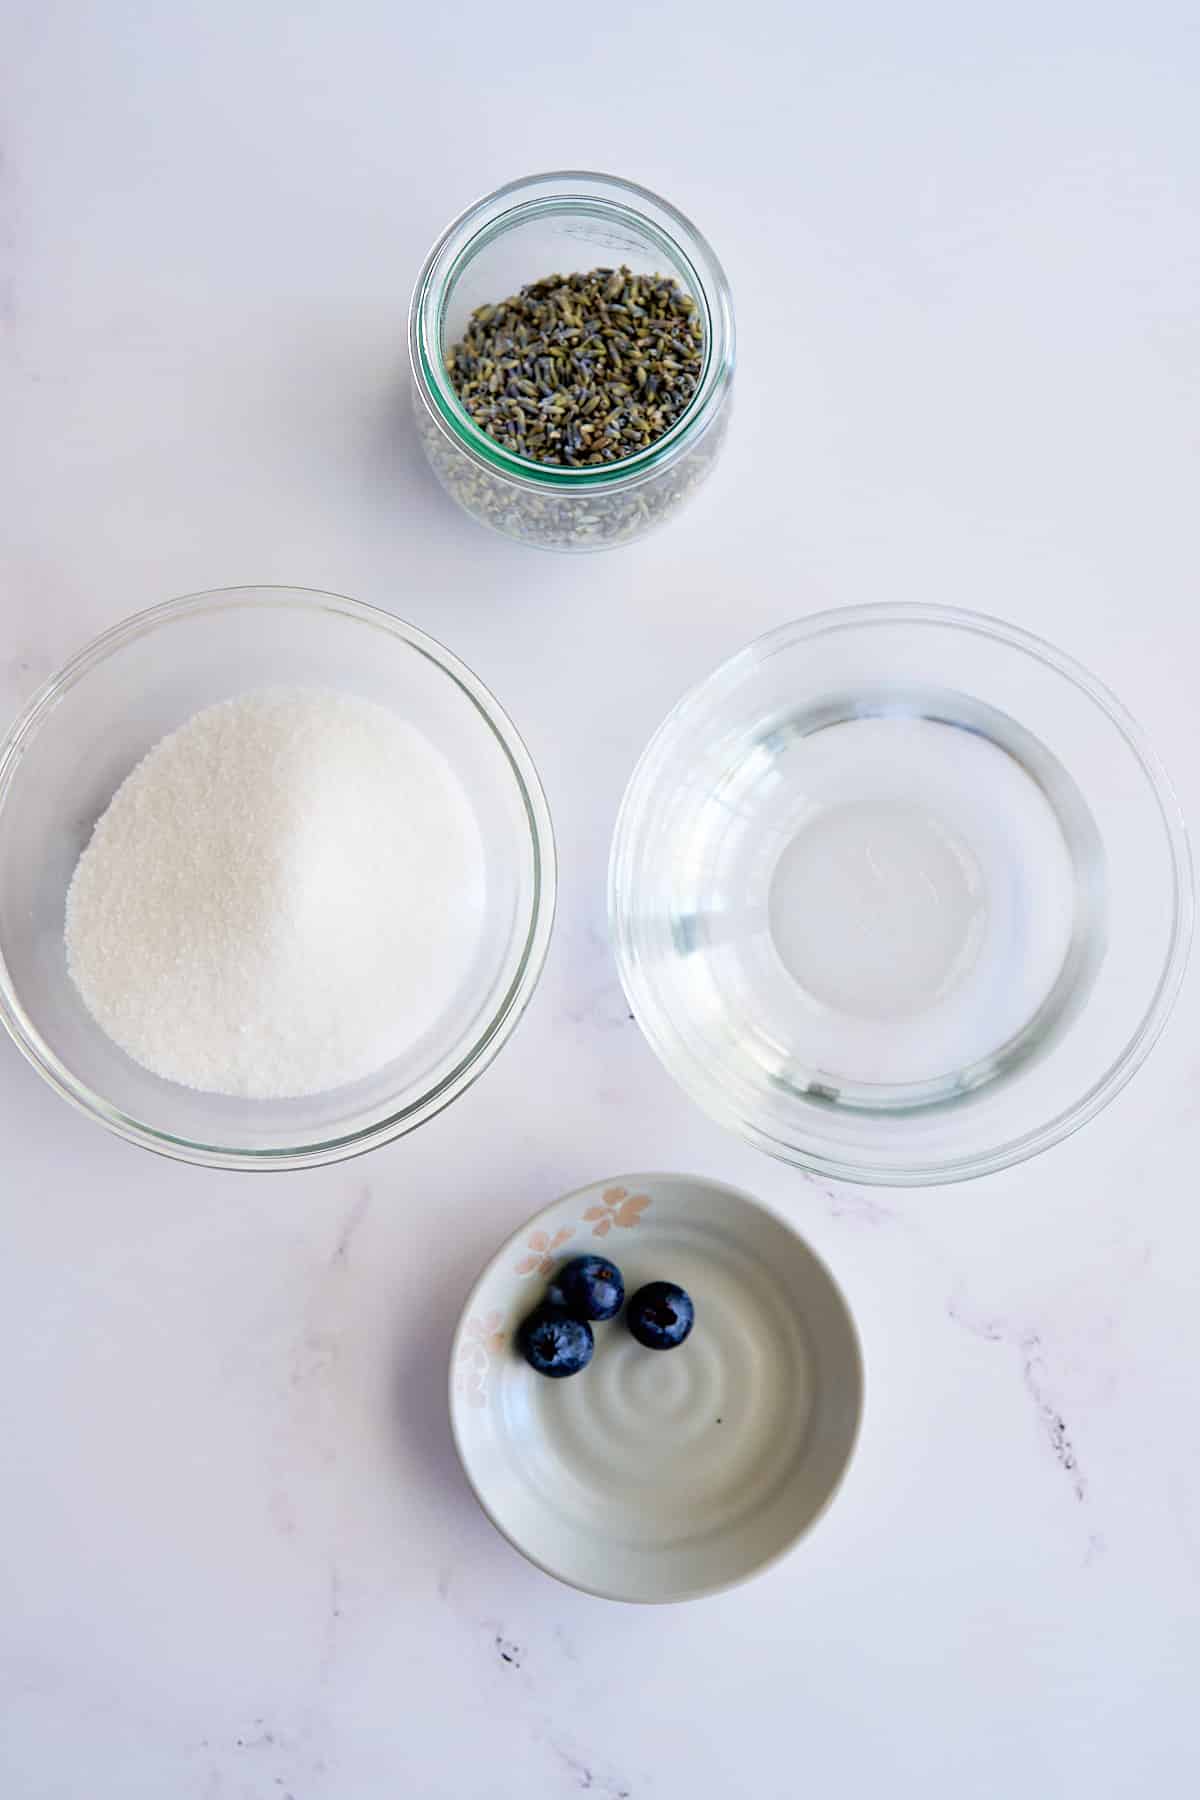 ingredients for the lavender syrup recipe on a white background. sugar, water, dried lavender leaves, and blueberries